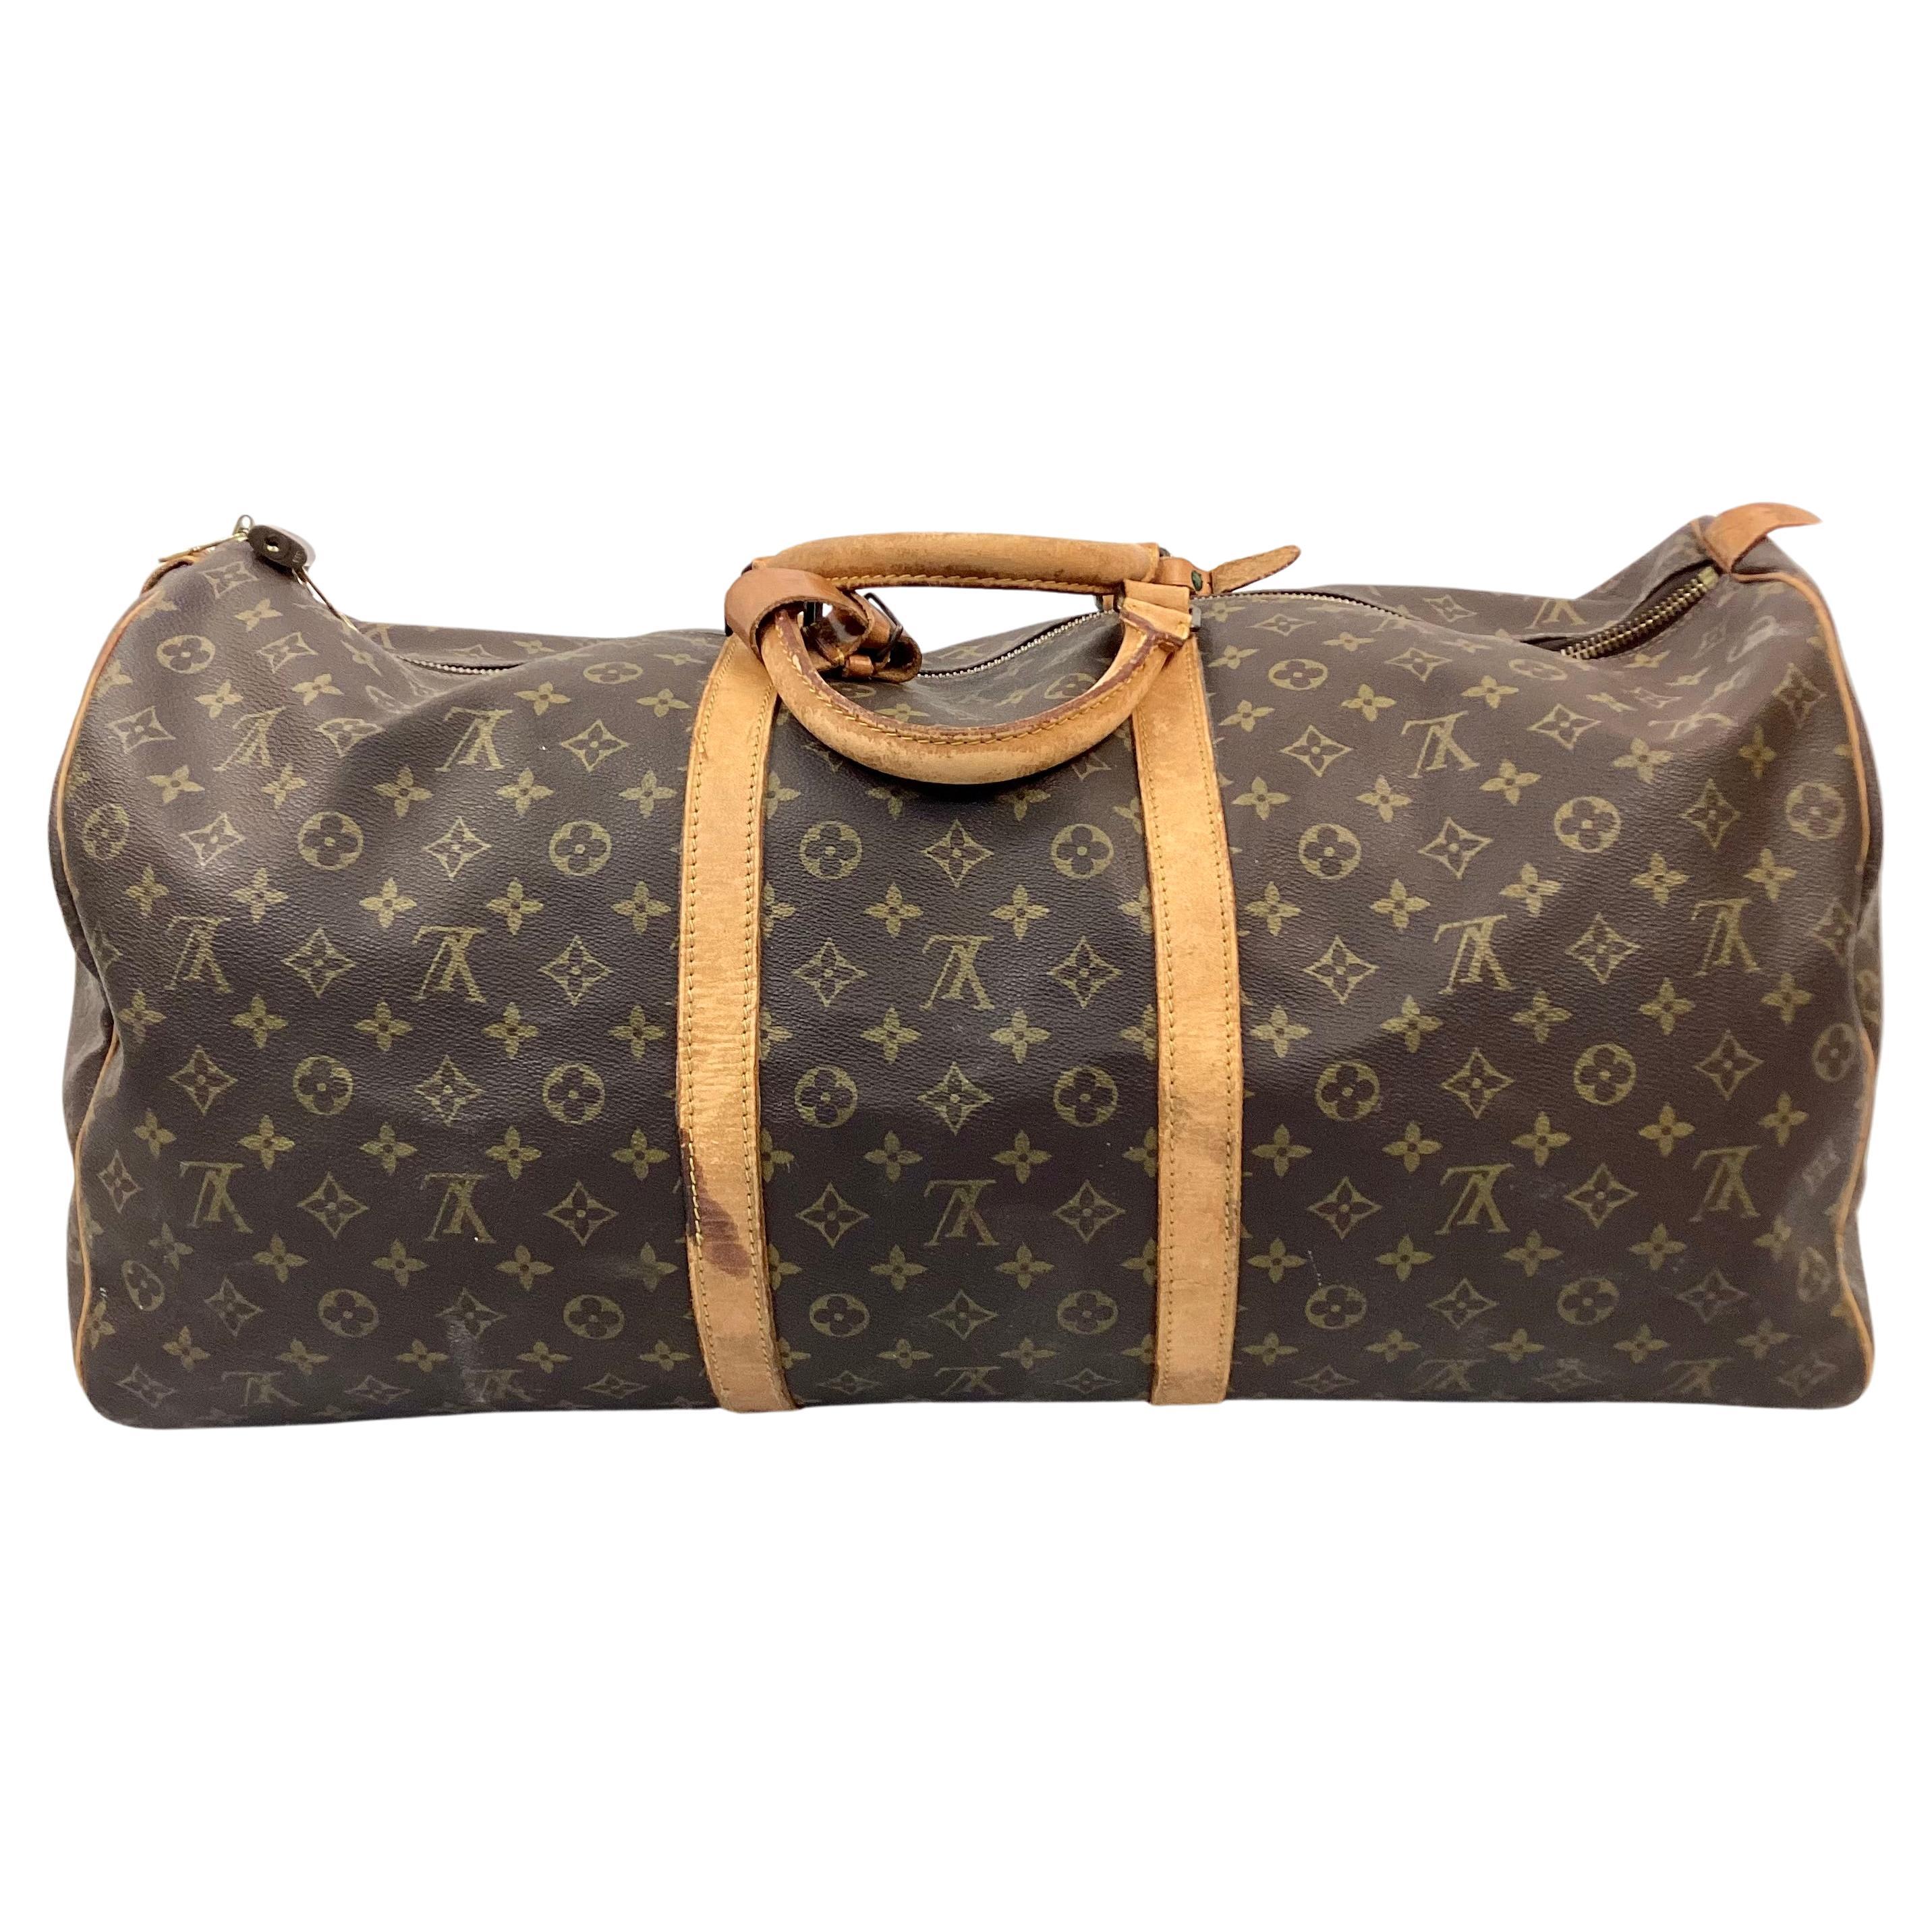 Timeless early 20th century Louis Vuitton Keepall travel Bag in classic monogrammed leather. Gold brass hardware, padlock and leather trim/tag all have the unique Louis Vuitton monogram. No key available.  Has double leather handles, 4.75